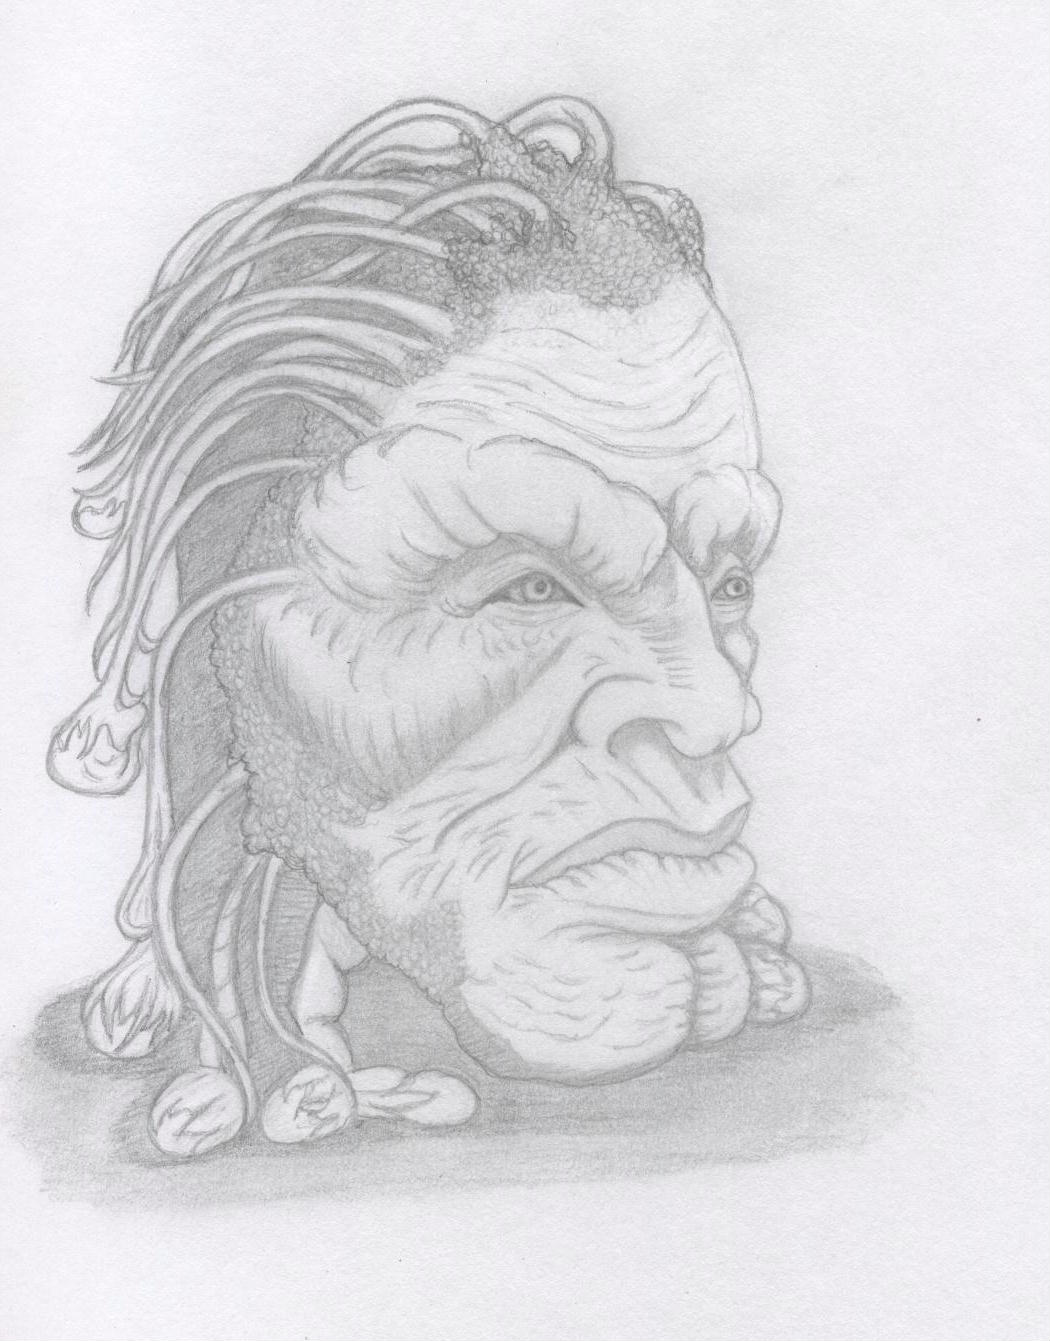 The Face Of Boe in profile by Ran_The_Hyena